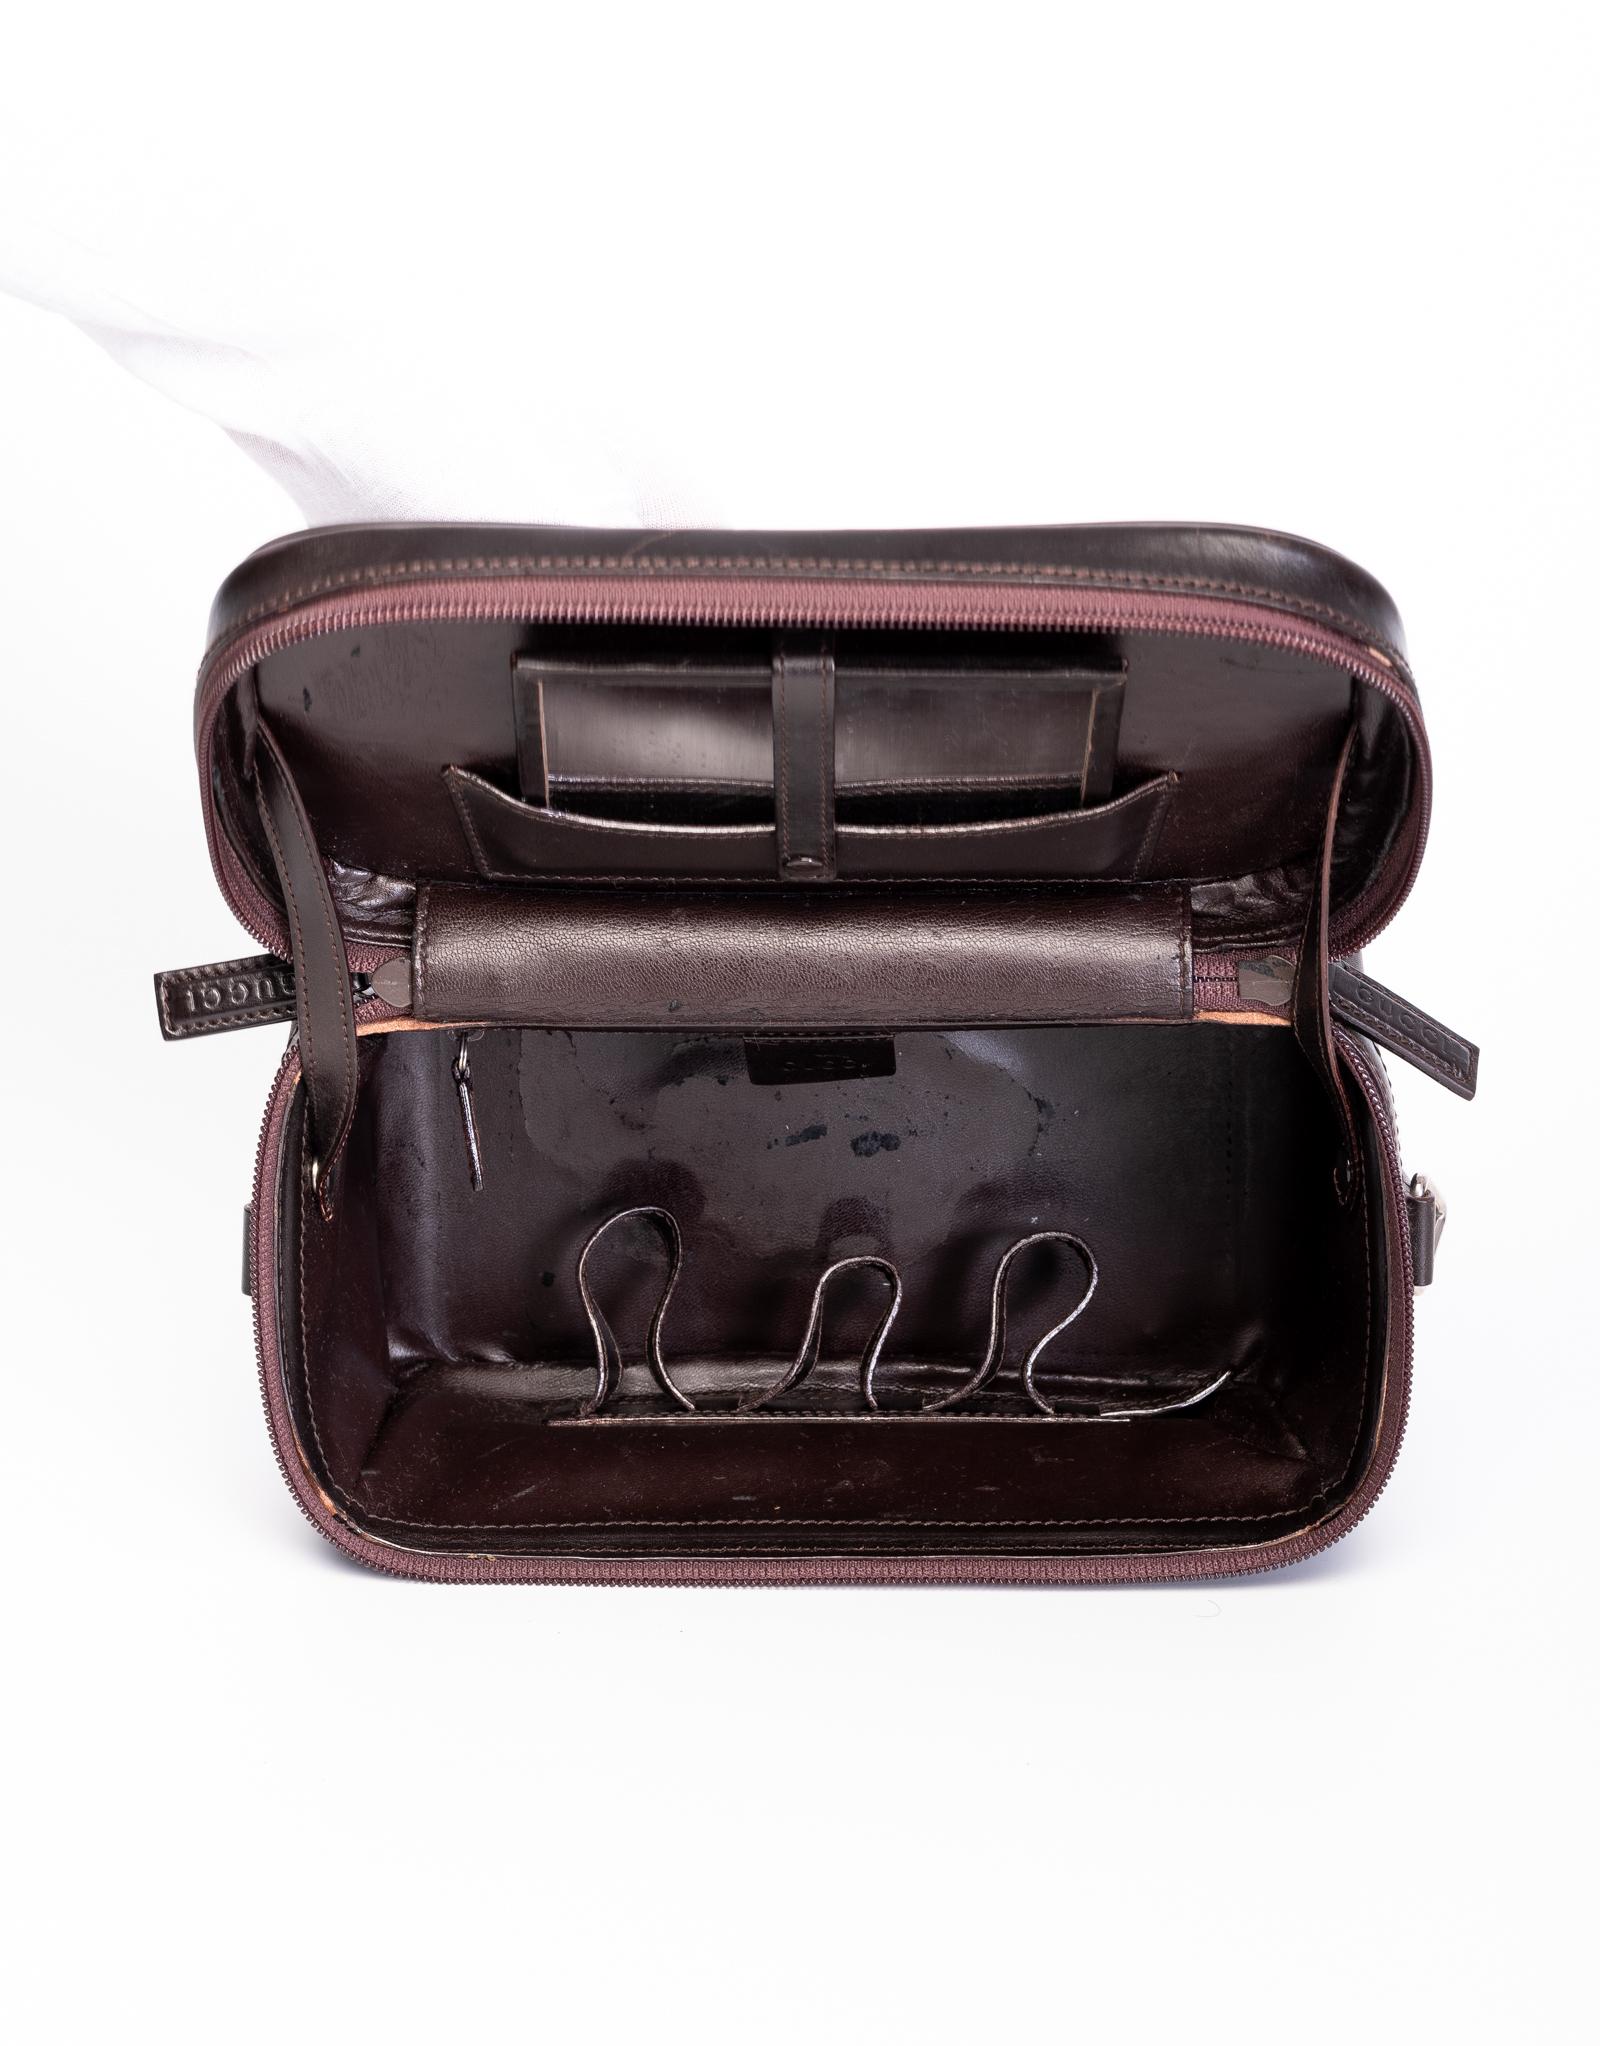 Gucci Bamboo Black On Black Vintage Vanity Bag In Fair Condition In Montreal, Quebec